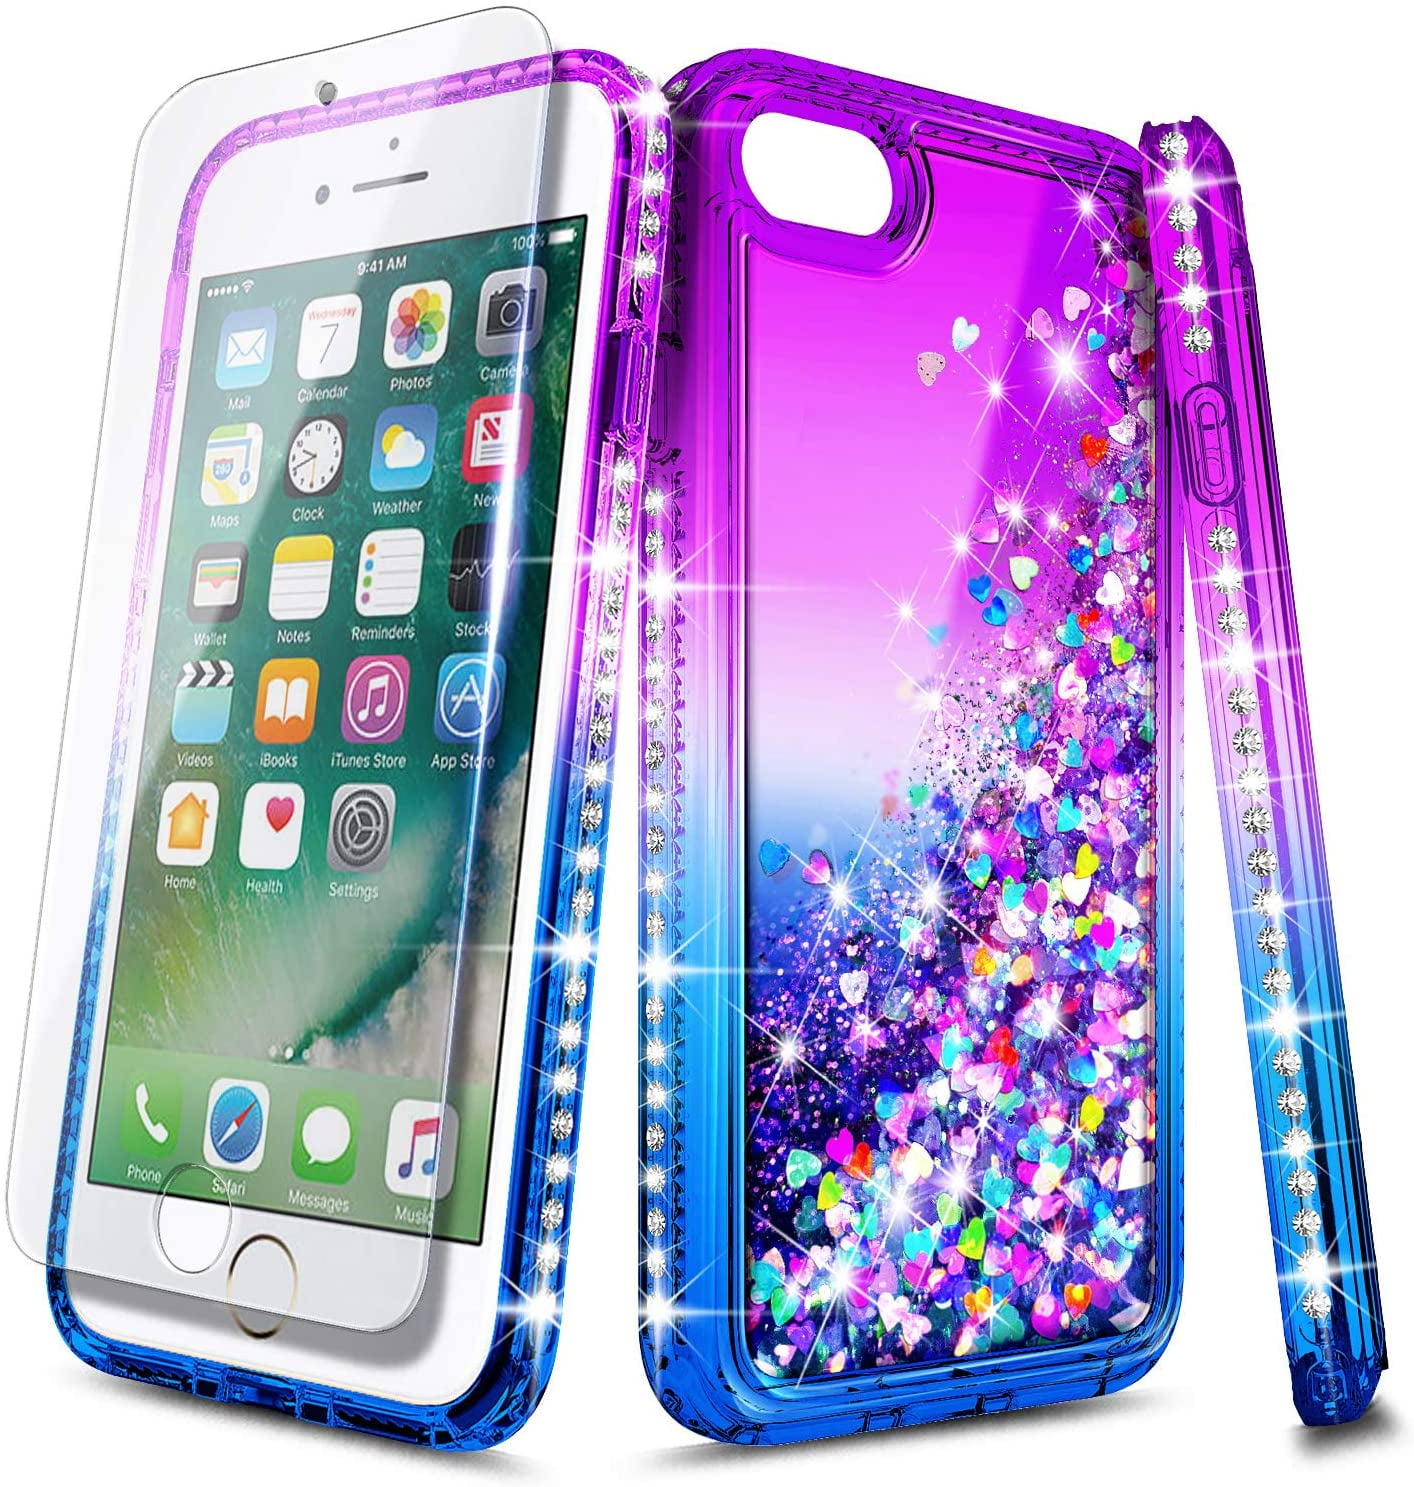 Case for iPhone 6S Plus, iPhone 6 Plus with Tempered Glass Screen Protector, Glitter Liquid Waterfall Floating Girls Women Kids Cute Phone Case (Purple/Blue) - Walmart.com